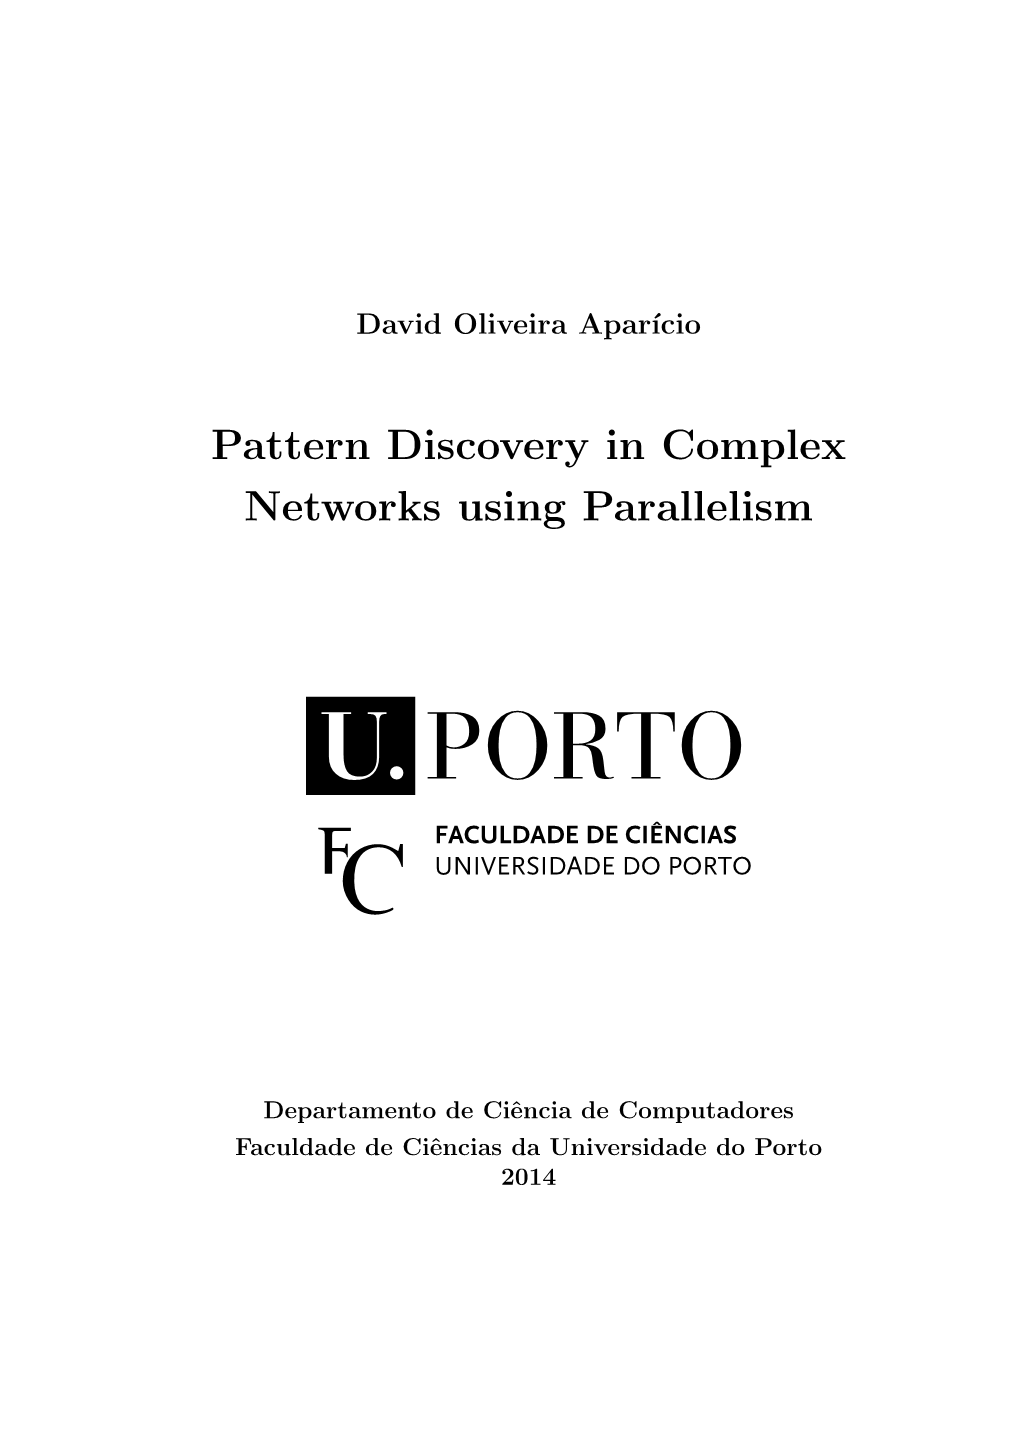 Pattern Discovery in Complex Networks Using Parallelism